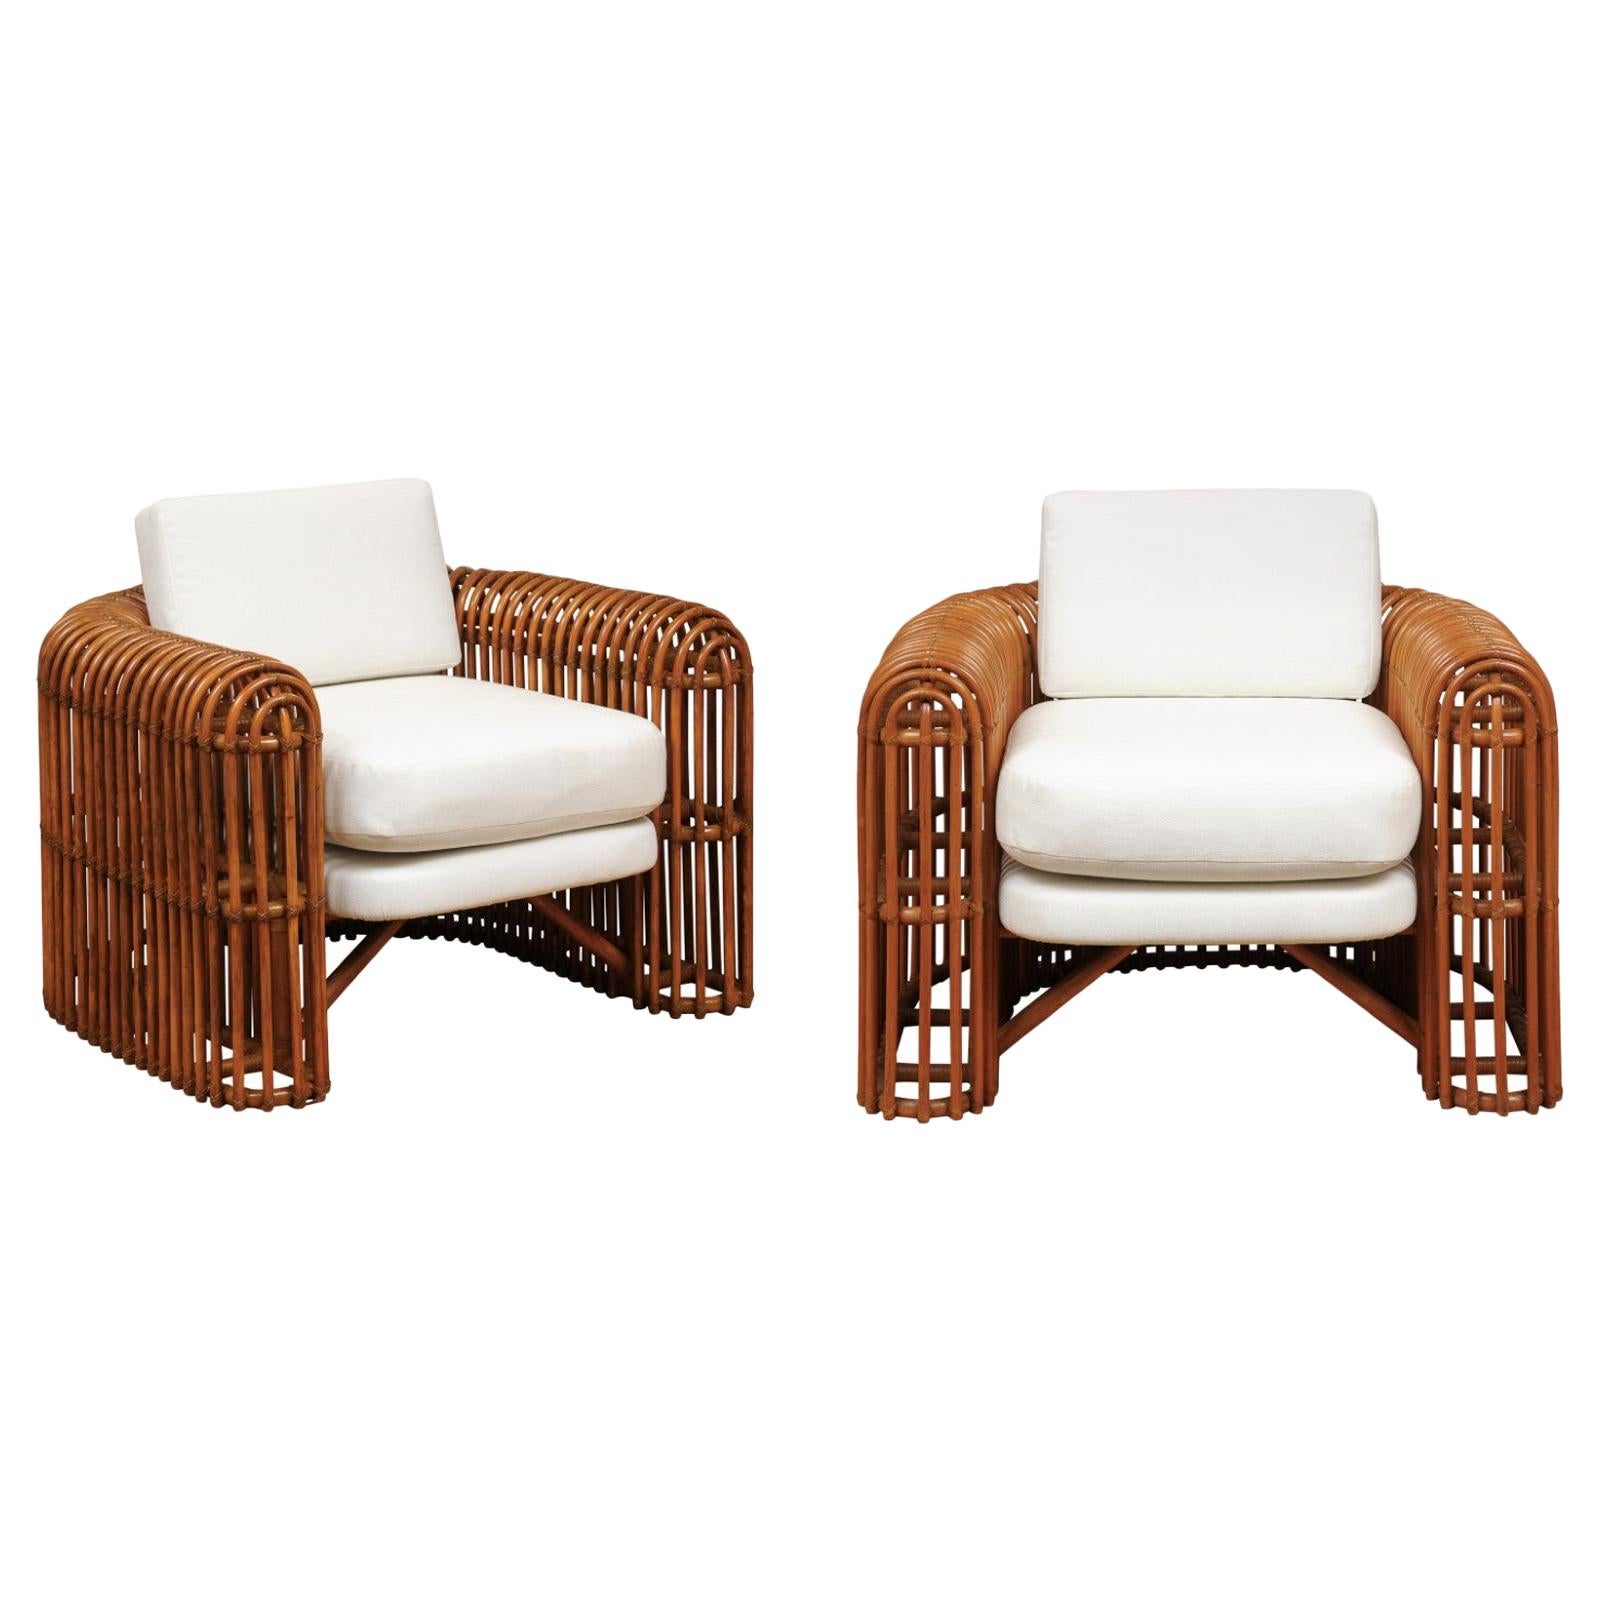 Spectacular Pair of Rib Series Club Chairs by Henry Olko, circa 1980